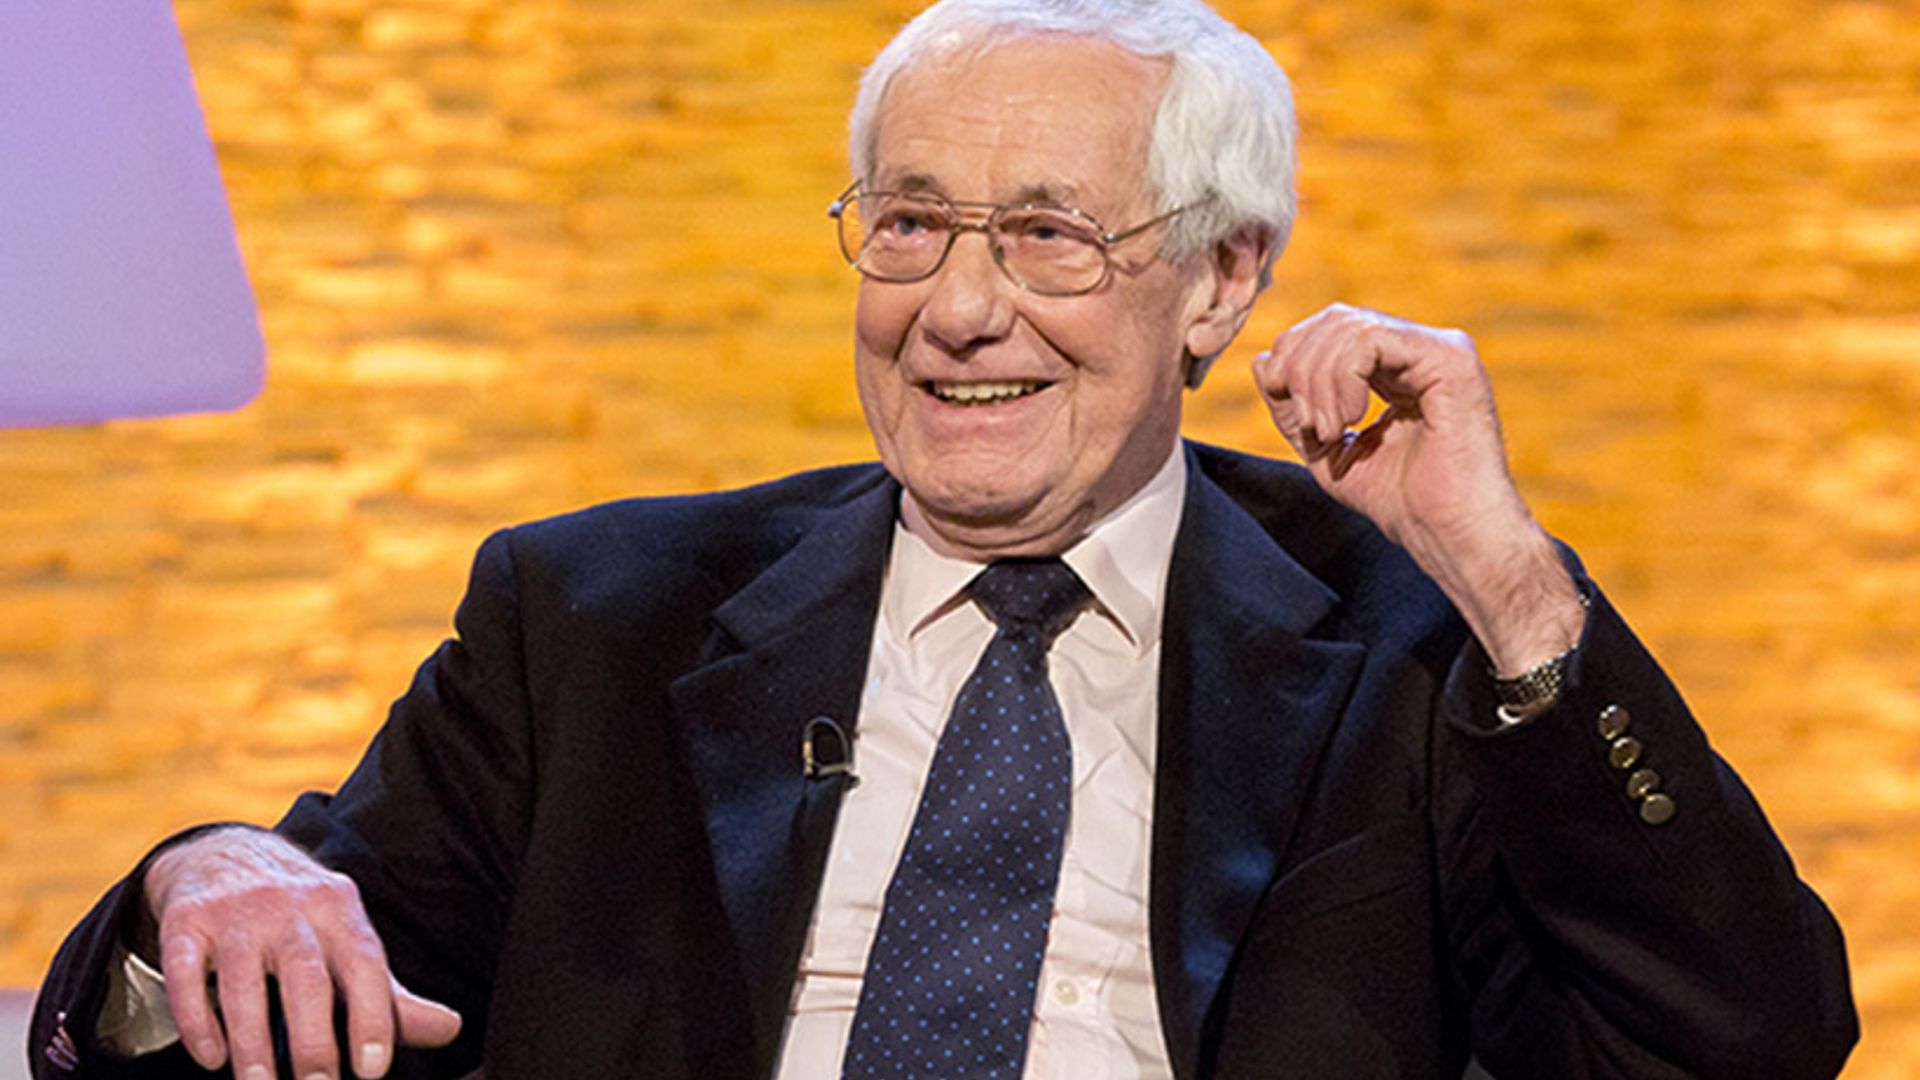 barry norman